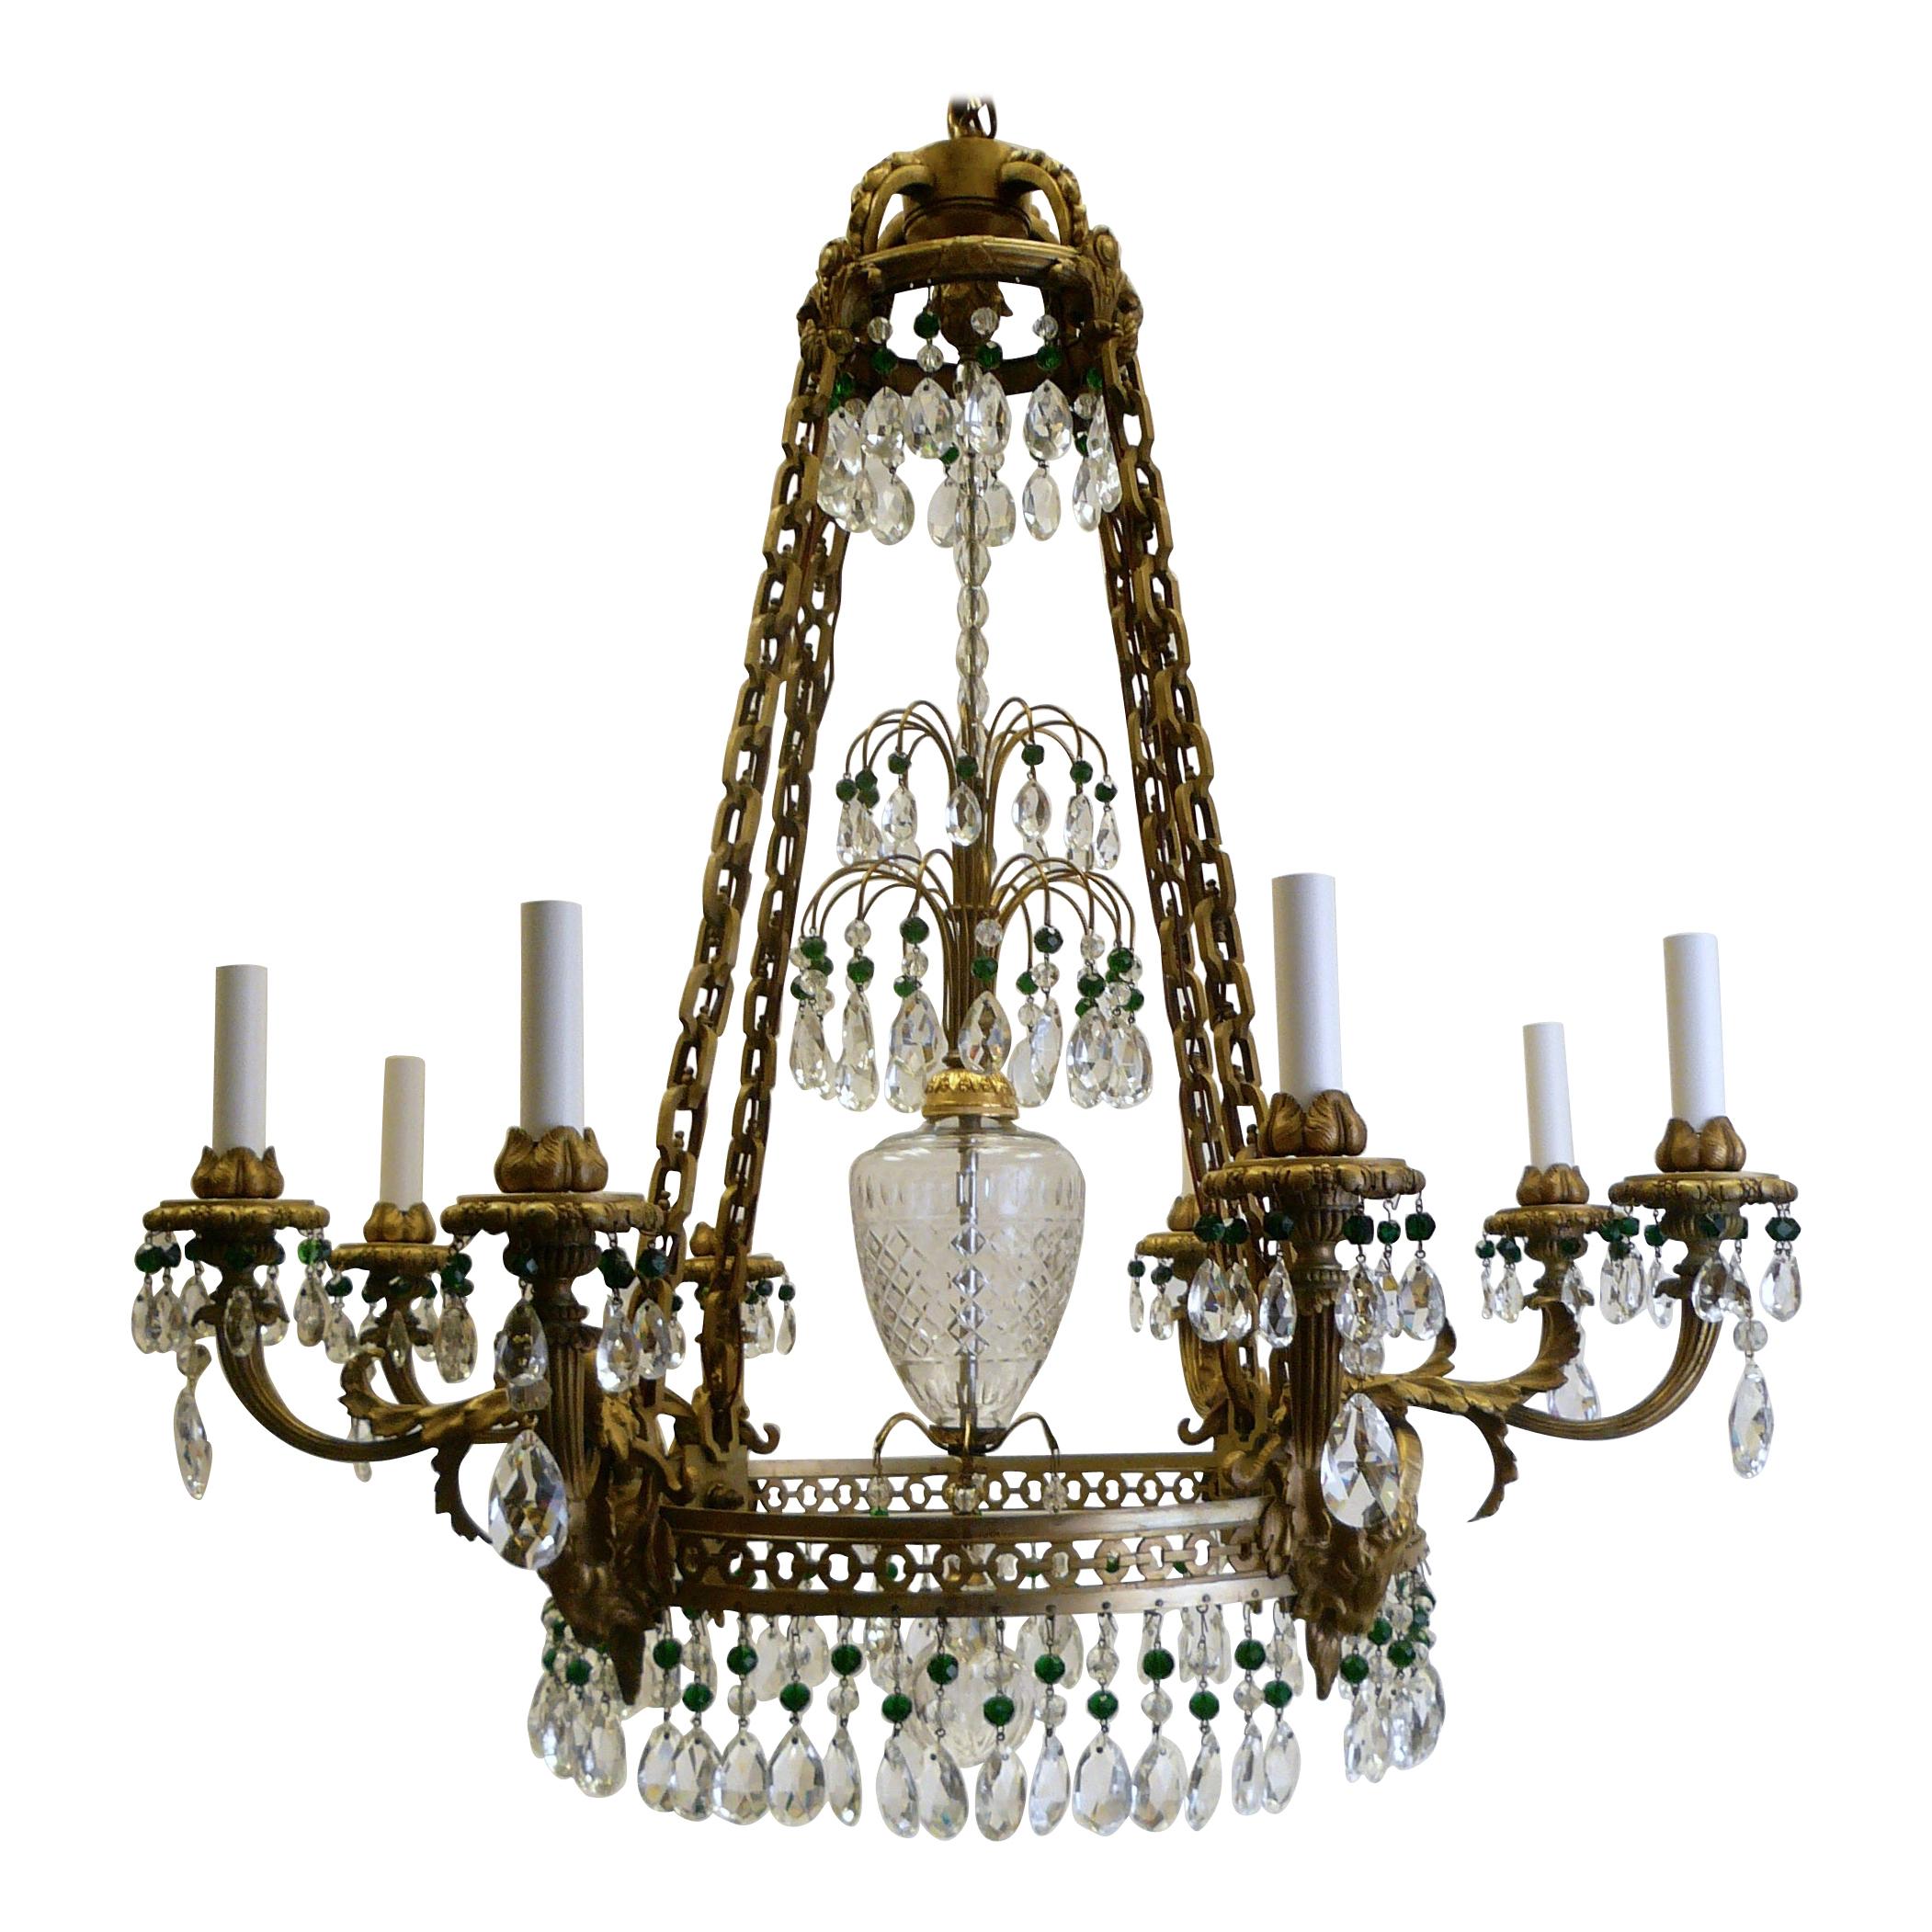 Russian Neoclassical or Baltic Style Bronze and Crystal Chandelier For Sale